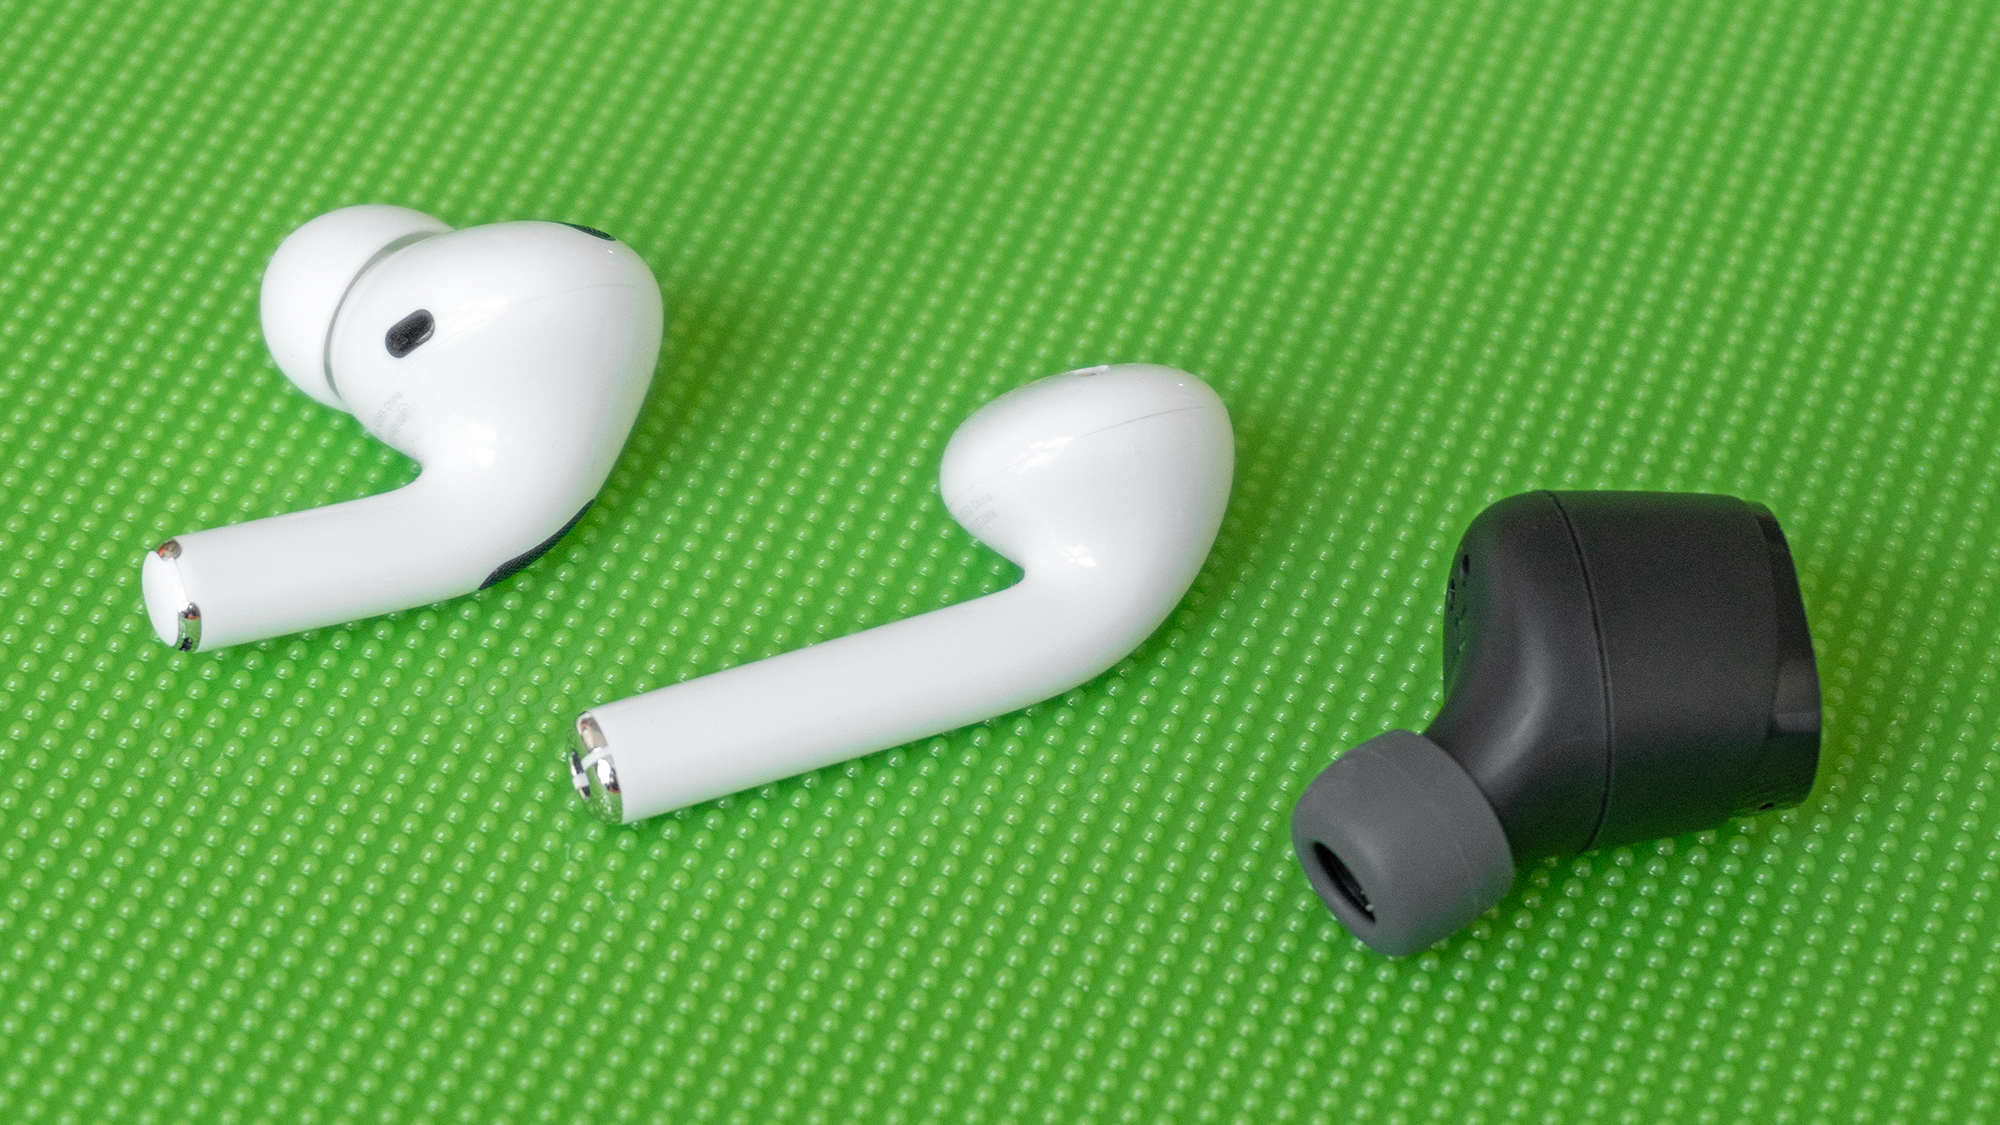 Given the battery life, it's impressive the Skullcandy True Jib wireless earbuds are as small as they are. (Photo: Andrew Liszewski/Gizmodo)